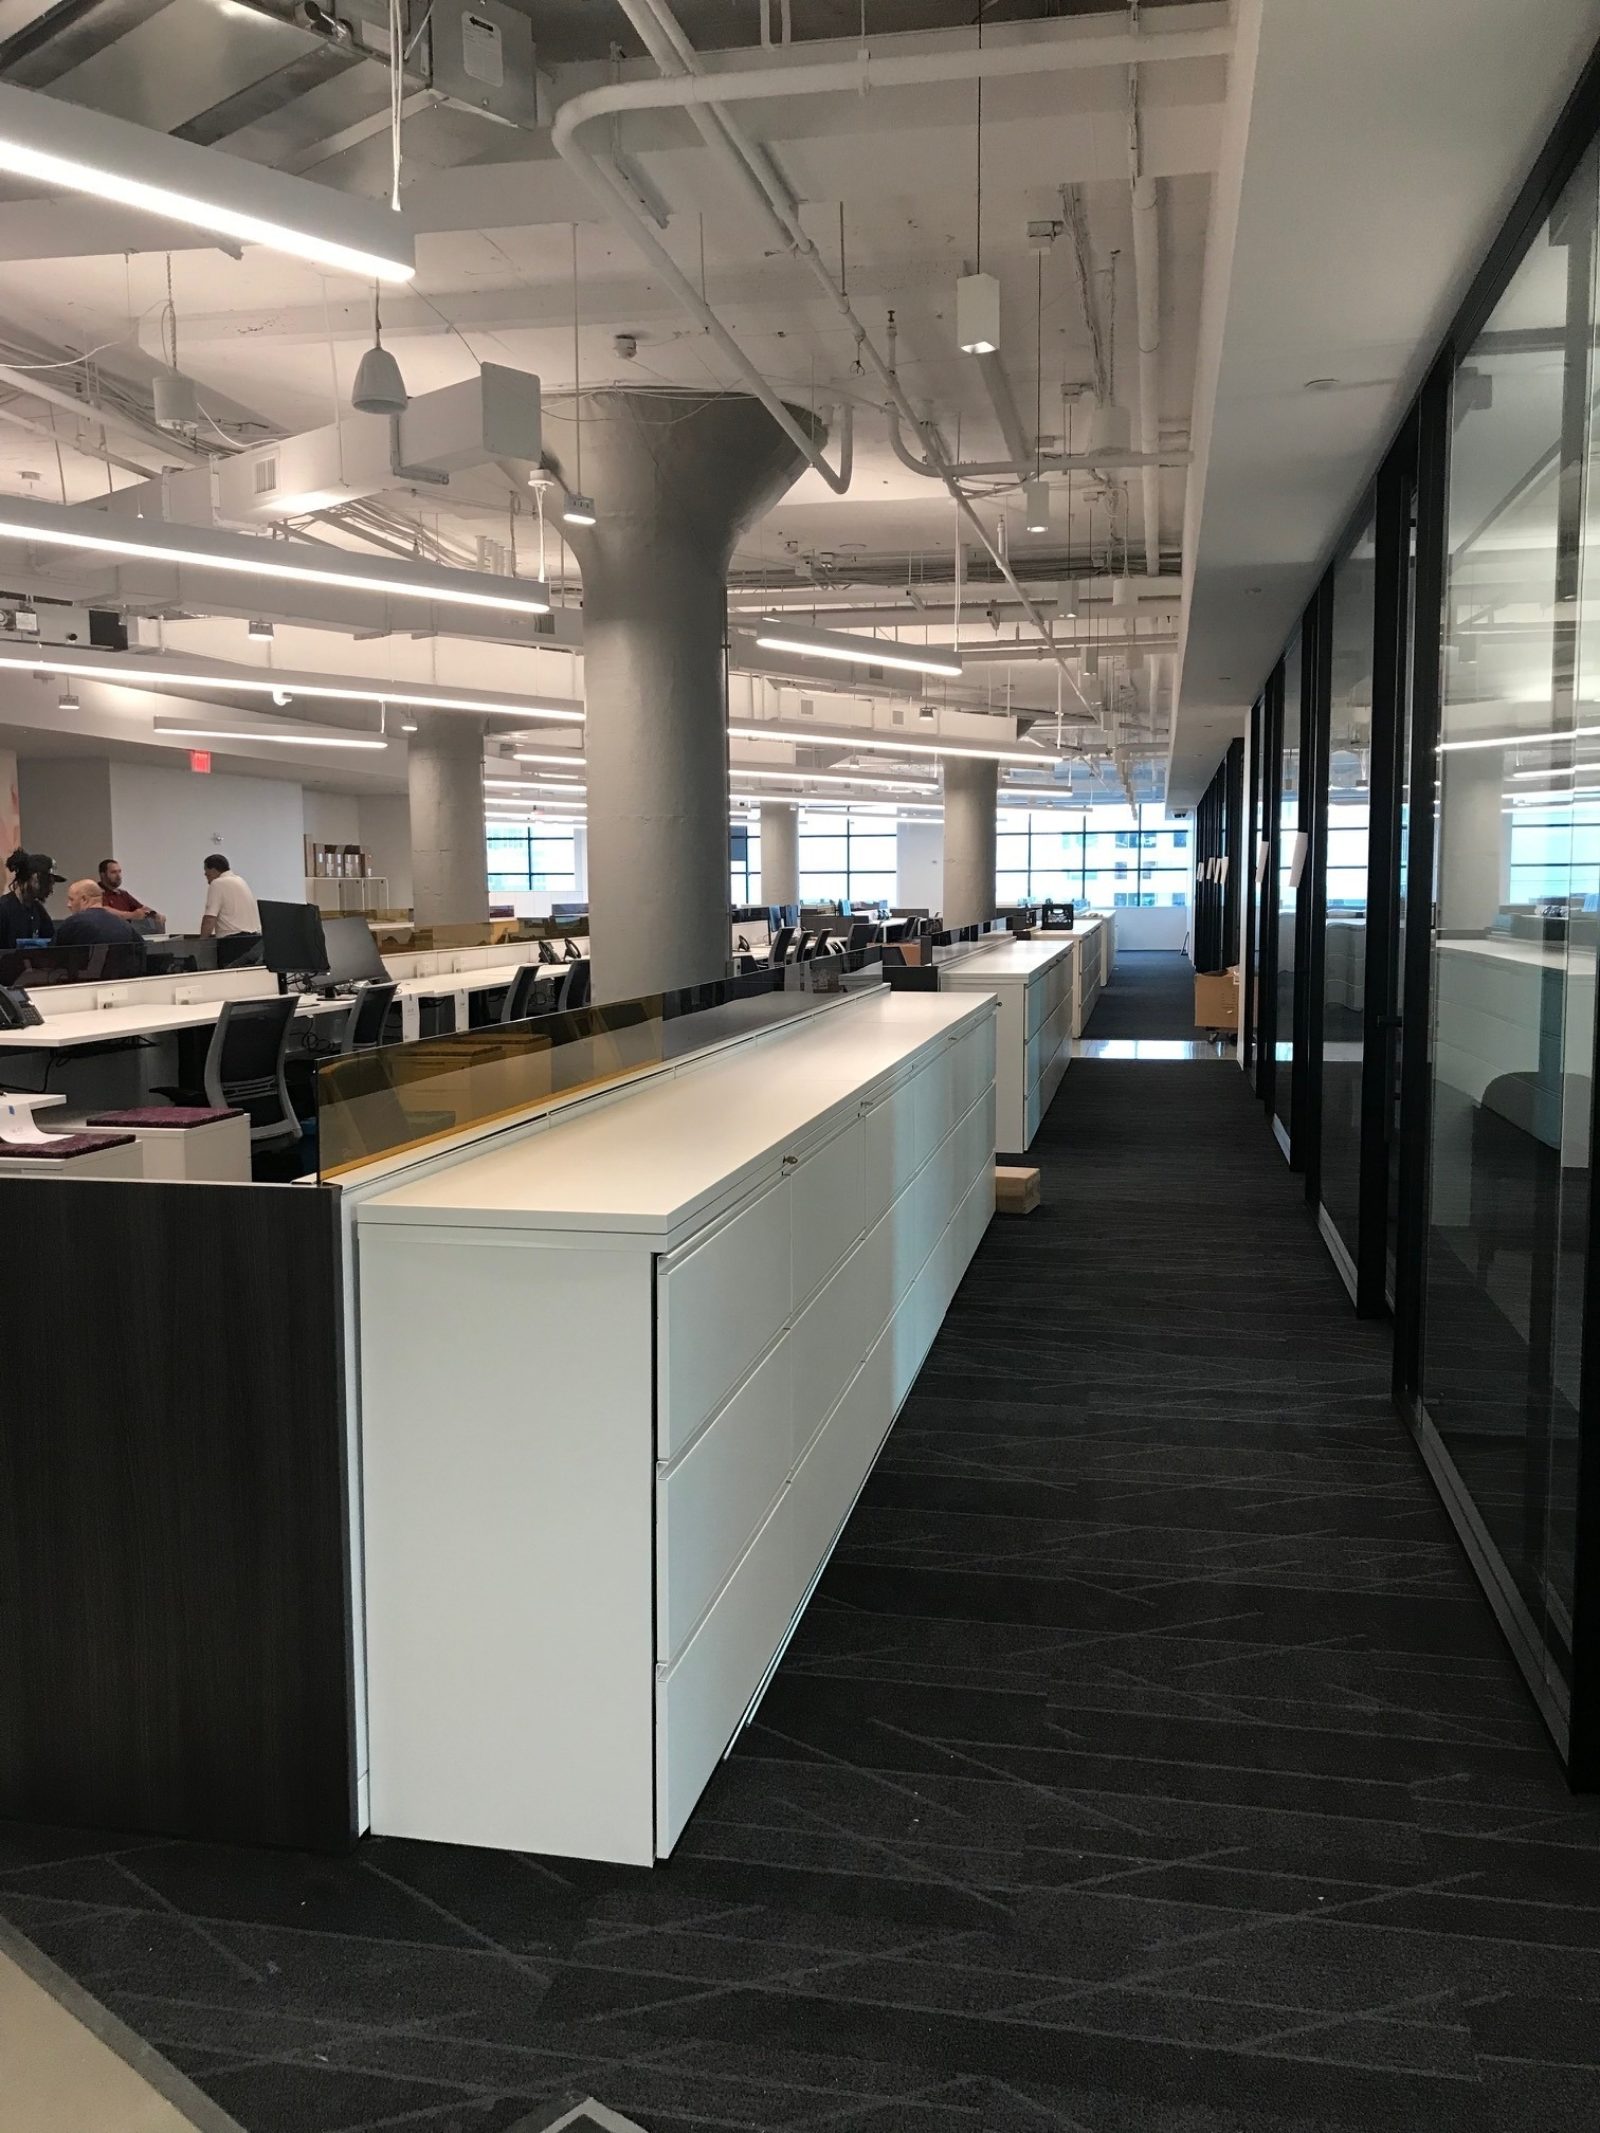 Modern office space showing hallway lined with lateral files, adjacent to a row of glass doors and walls.